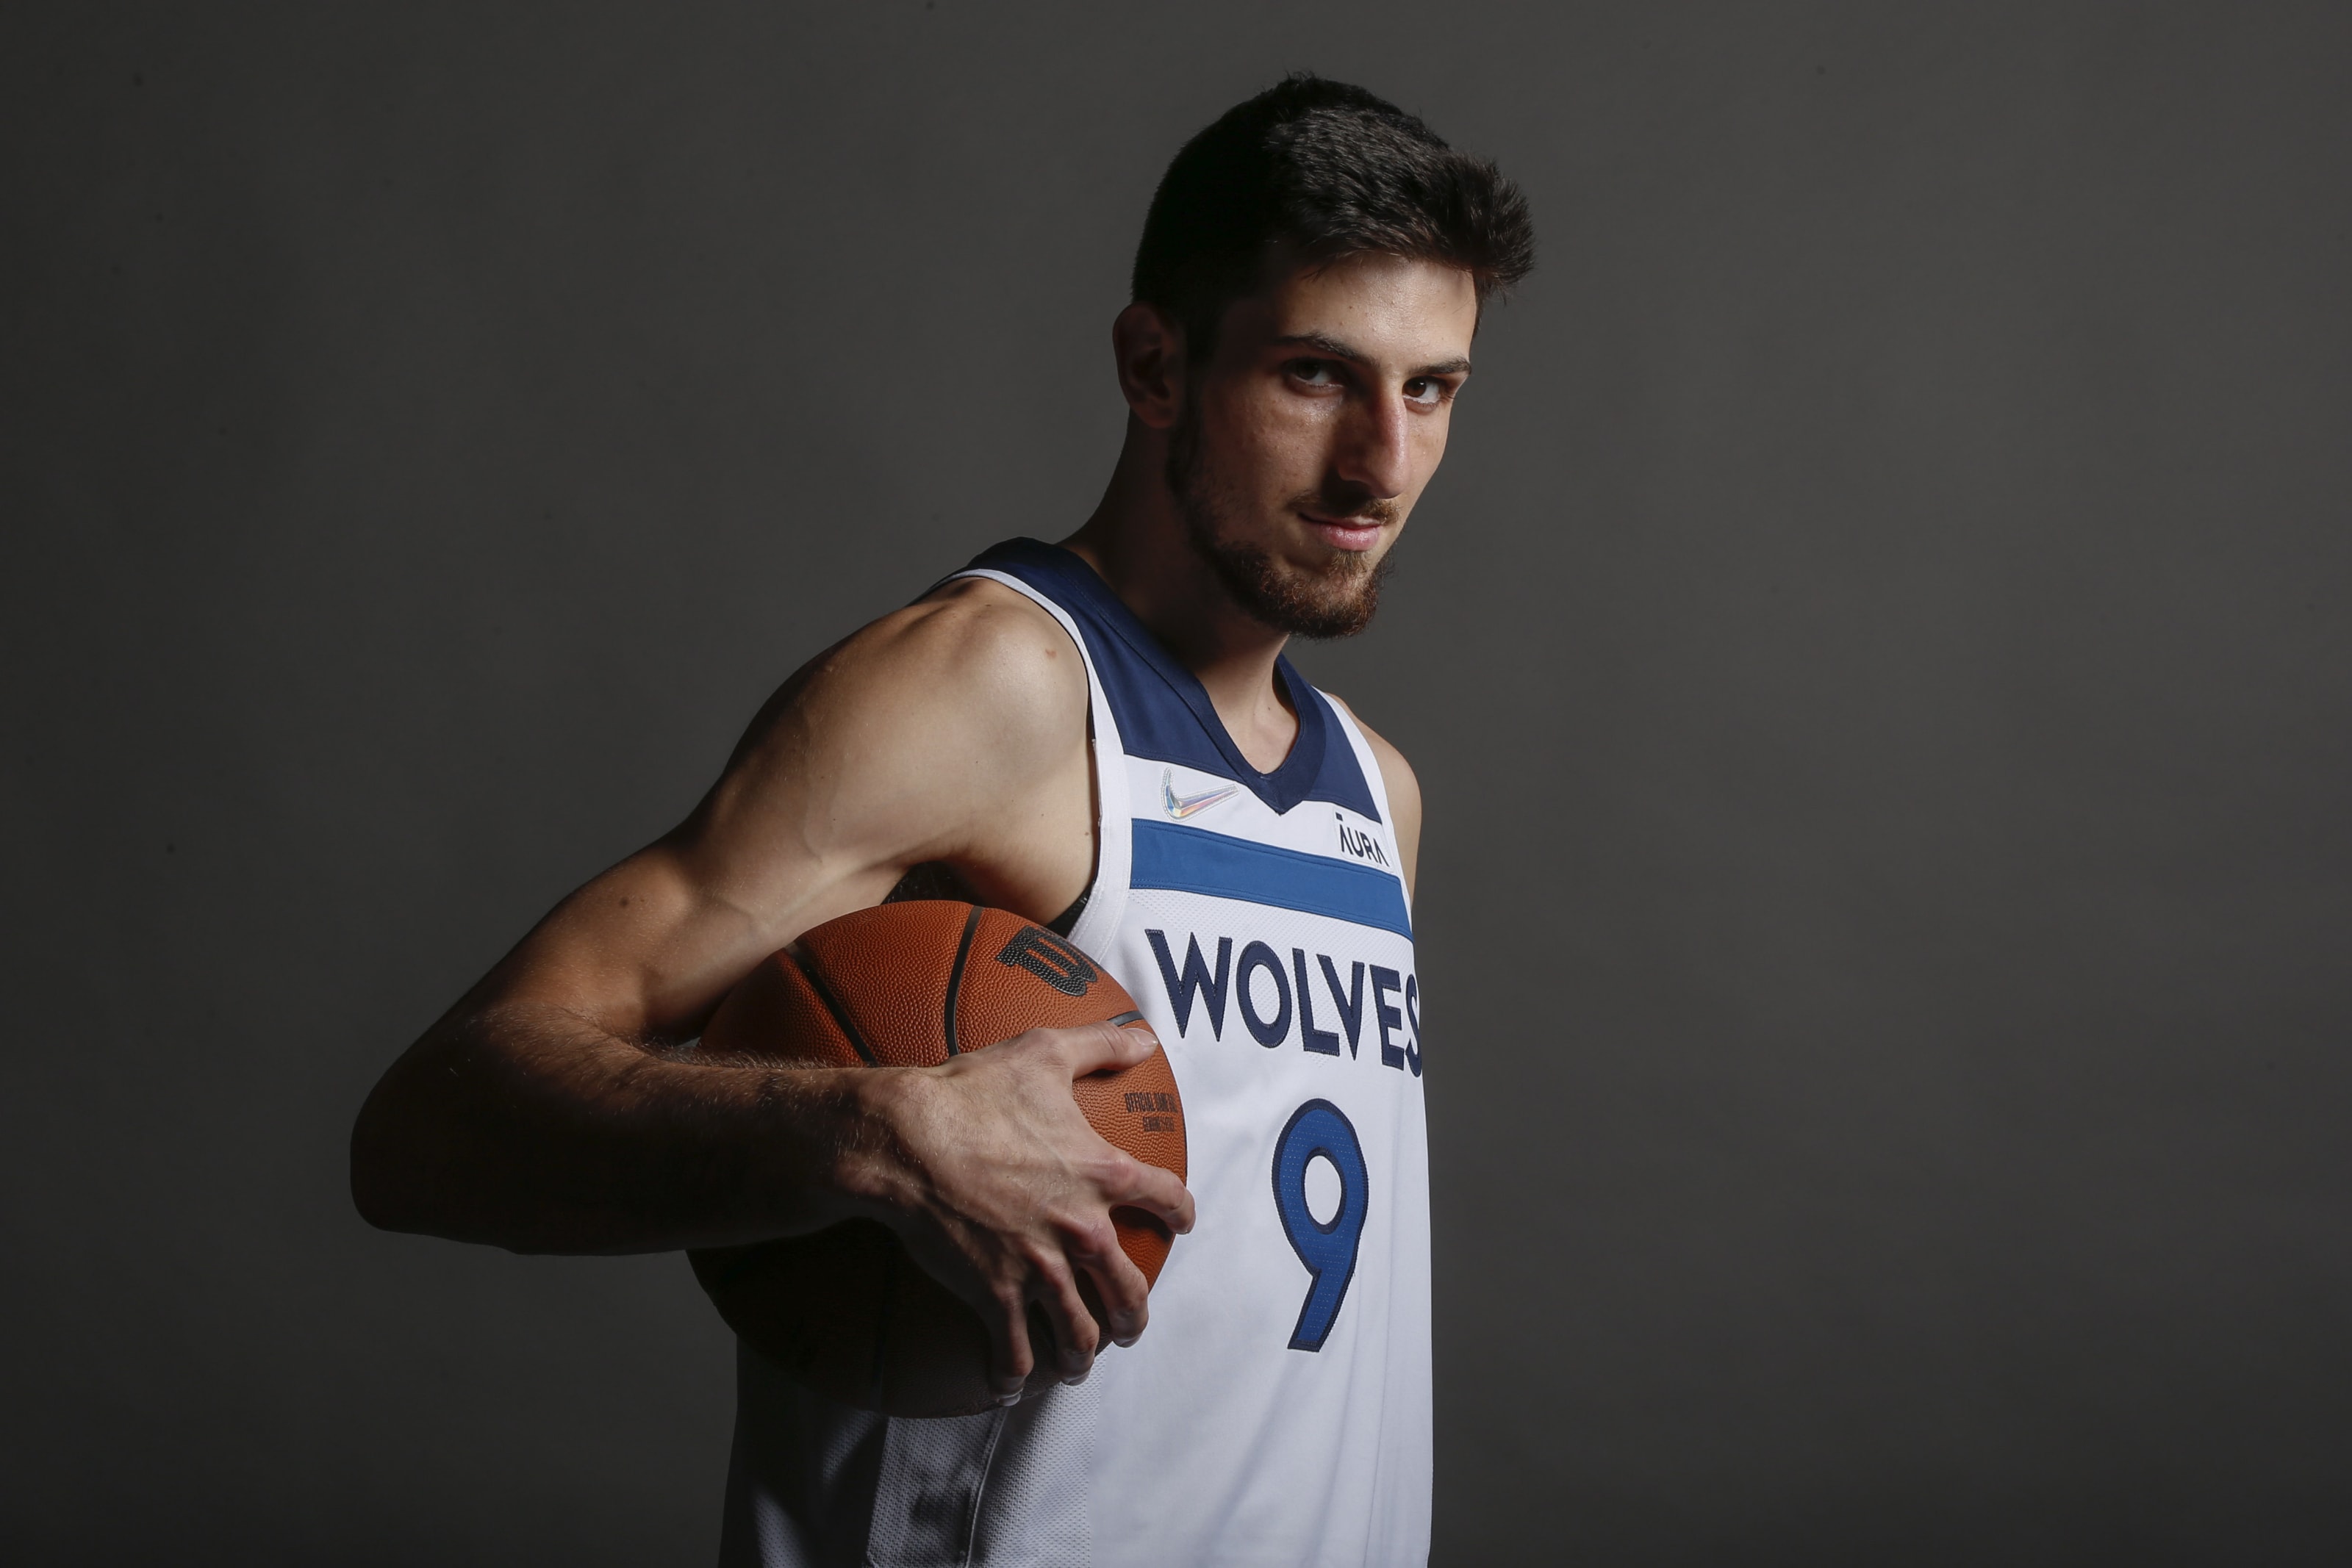 Minnesota Timberwolves 3 potential Xfactors on Wolves roster